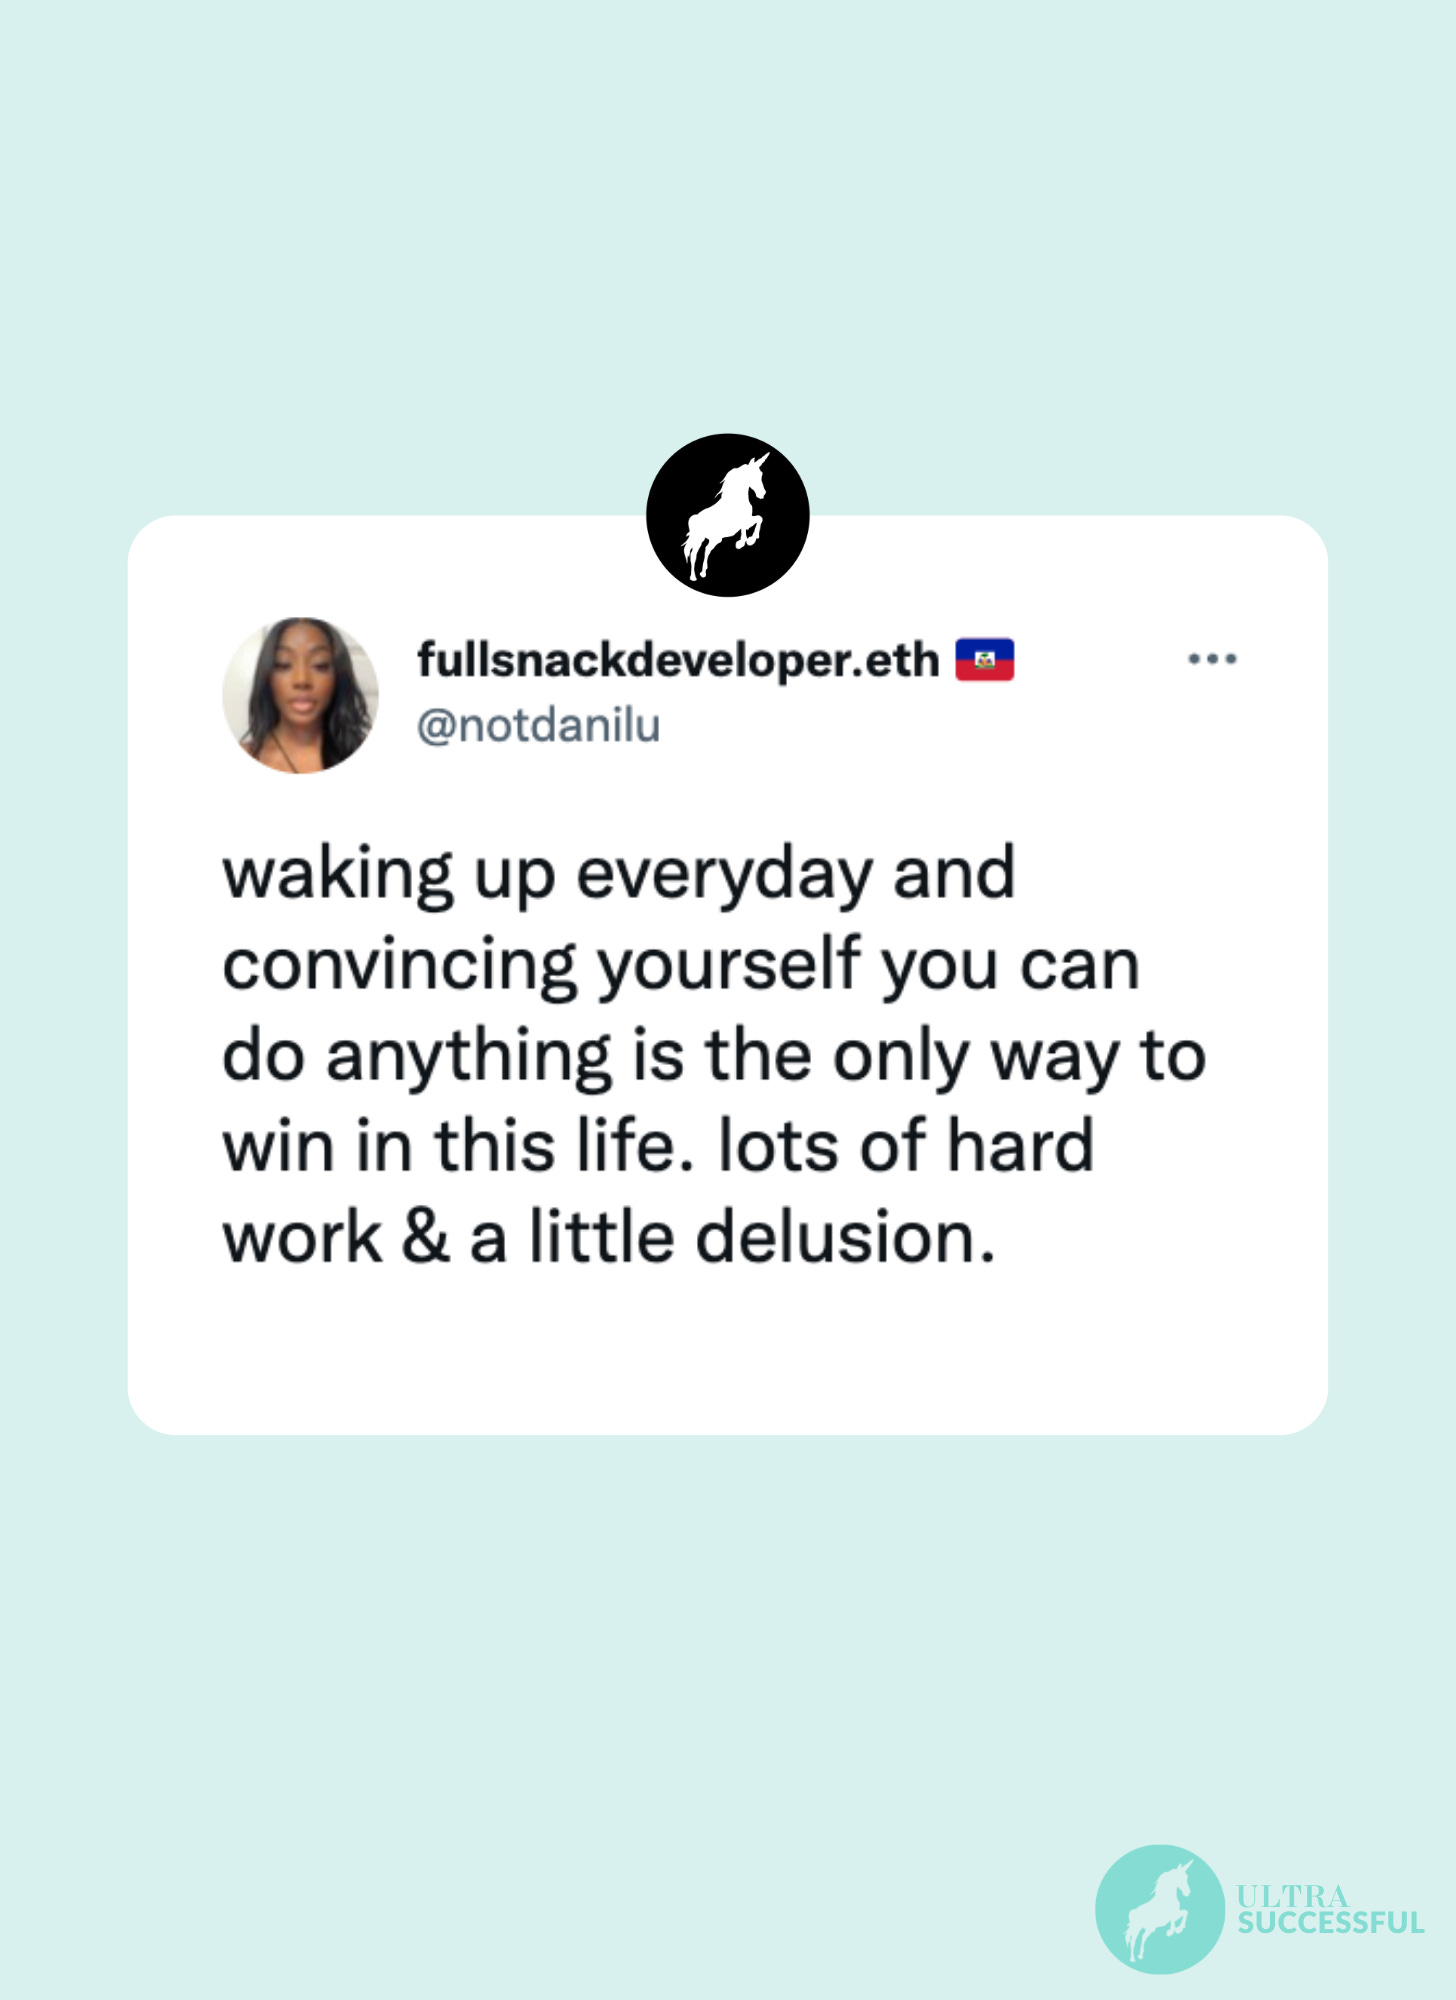 @notdanilu: waking up everyday and convincing yourself you can do anything is the only way to win in this life. lots of hard work & a little delusion.